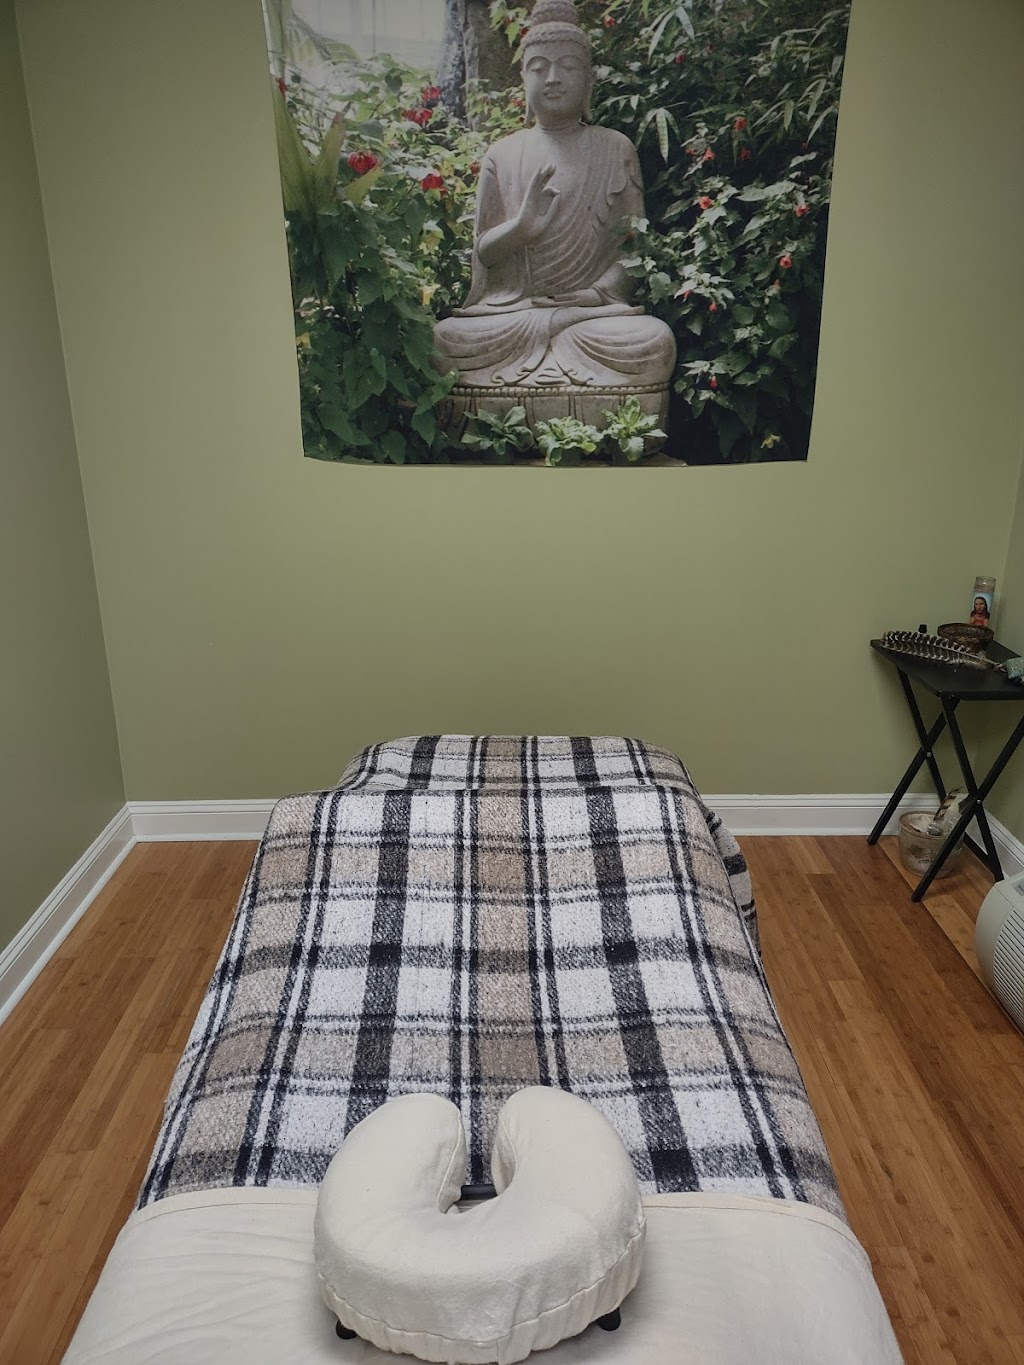 Talking Feathers Wellness Center | 239 Main St, East Greenville, PA 18041 | Phone: (215) 470-0176